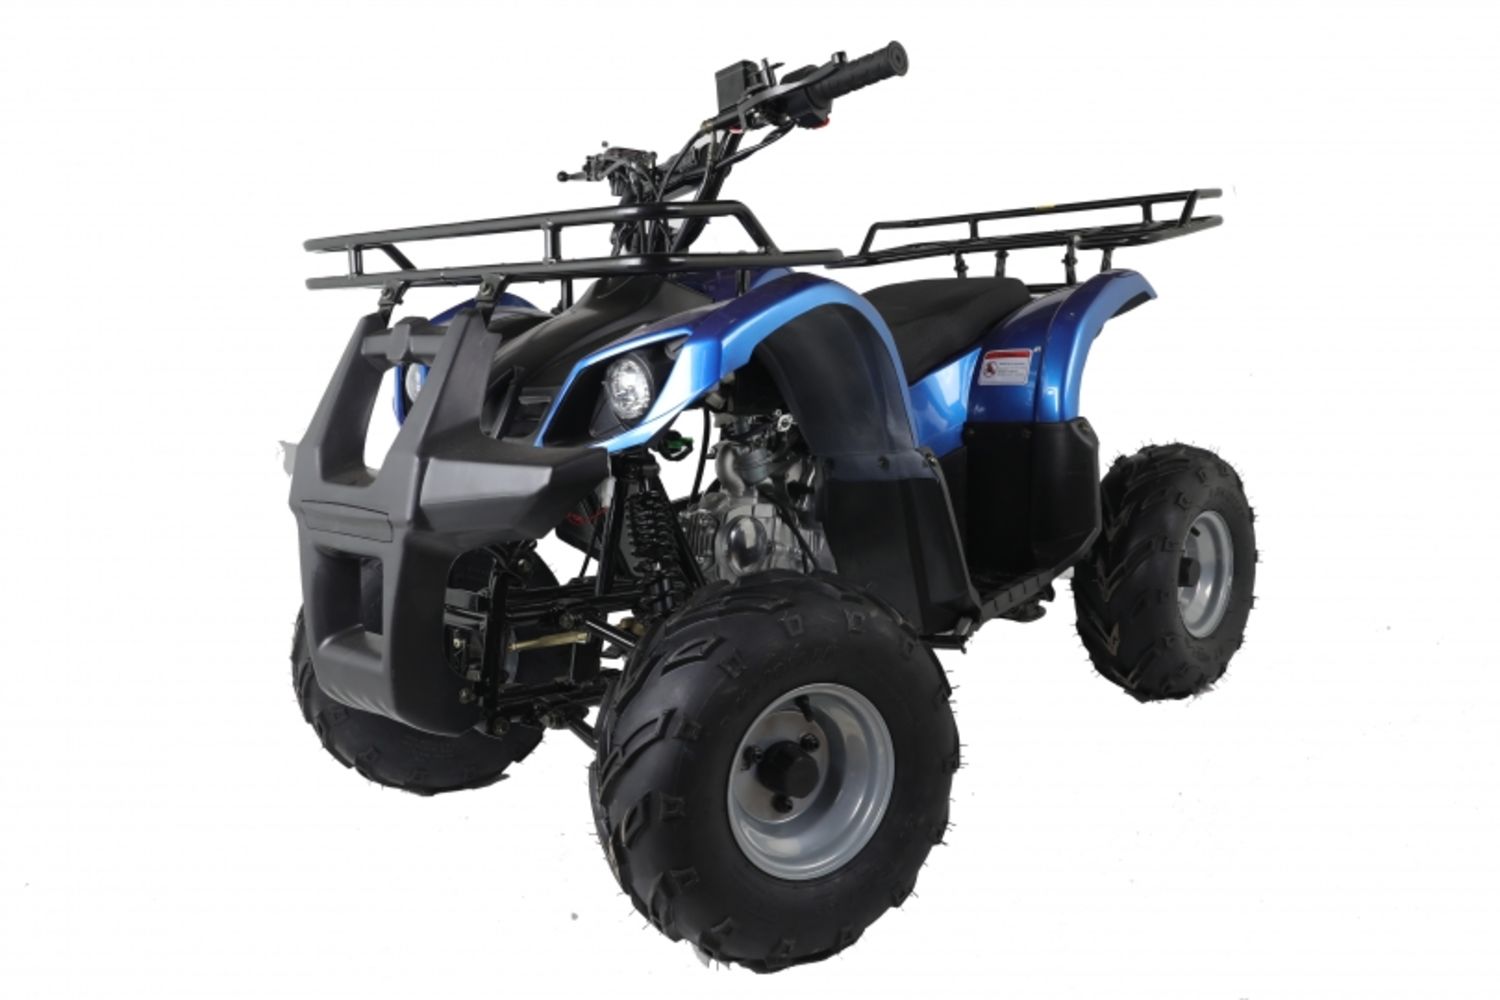 Brand New Petrol Quad Bikes & Dirt Bikes From 50 cc to 125 cc, Plus Commercial & Professional Tools